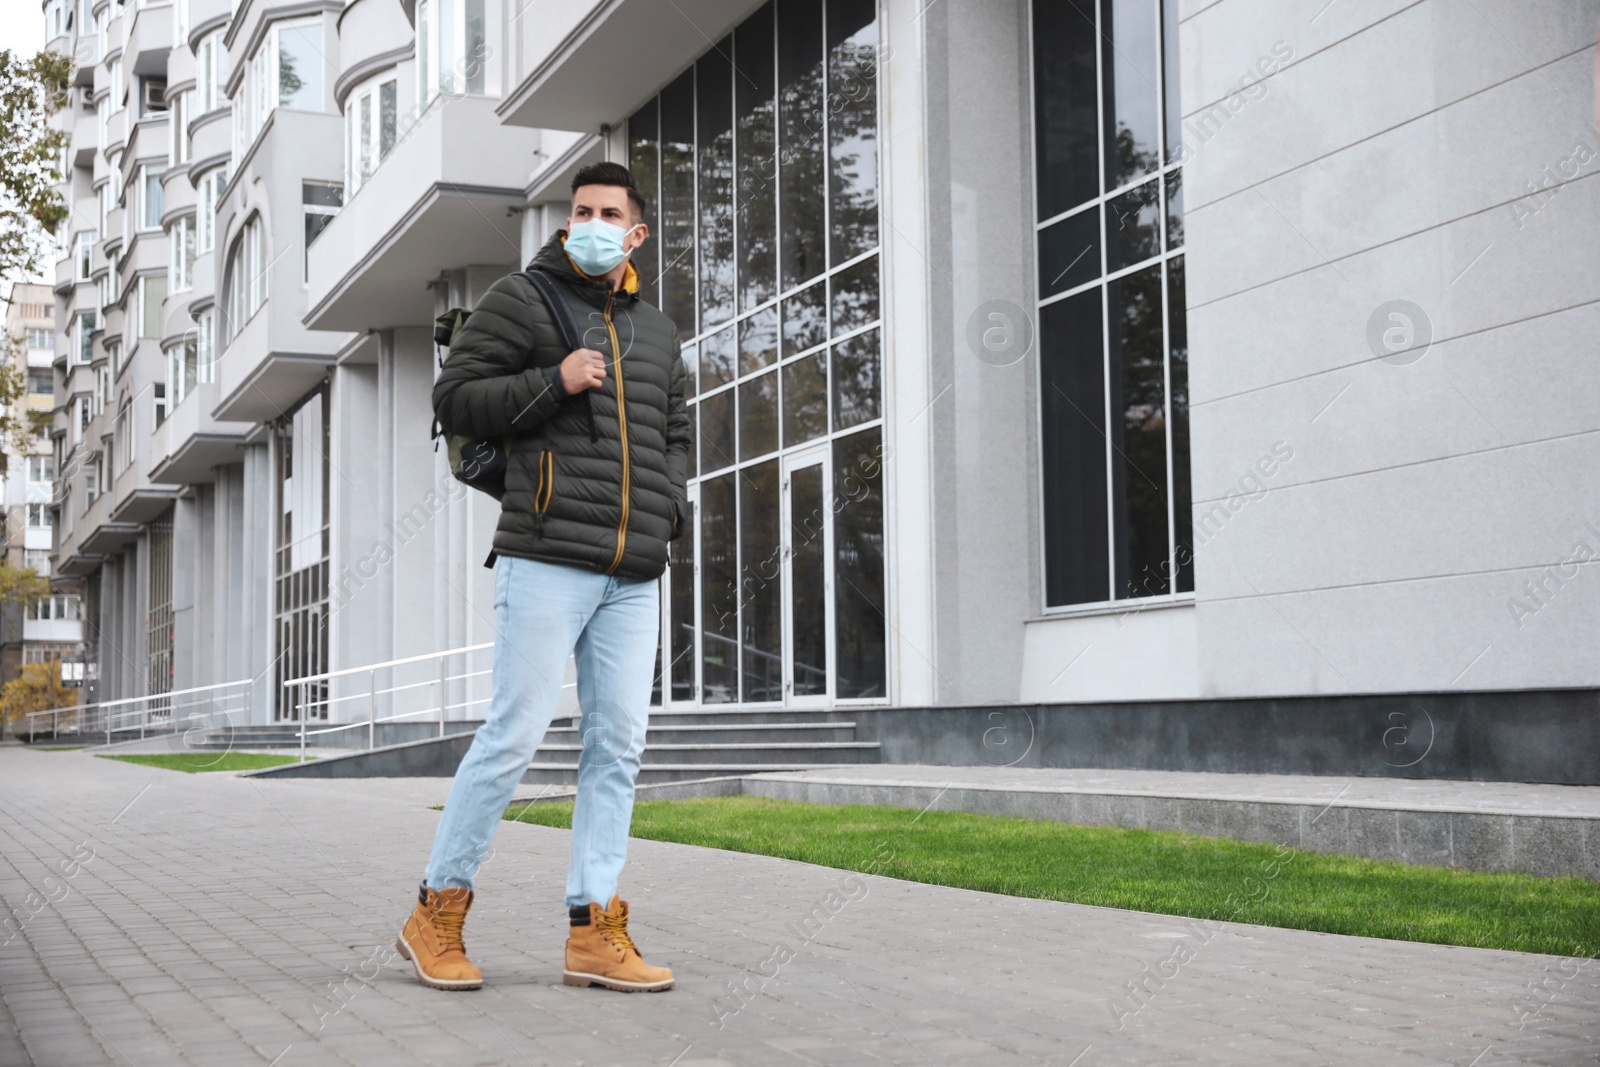 Photo of Man in medical face mask walking outdoors. Personal protection during COVID-19 pandemic